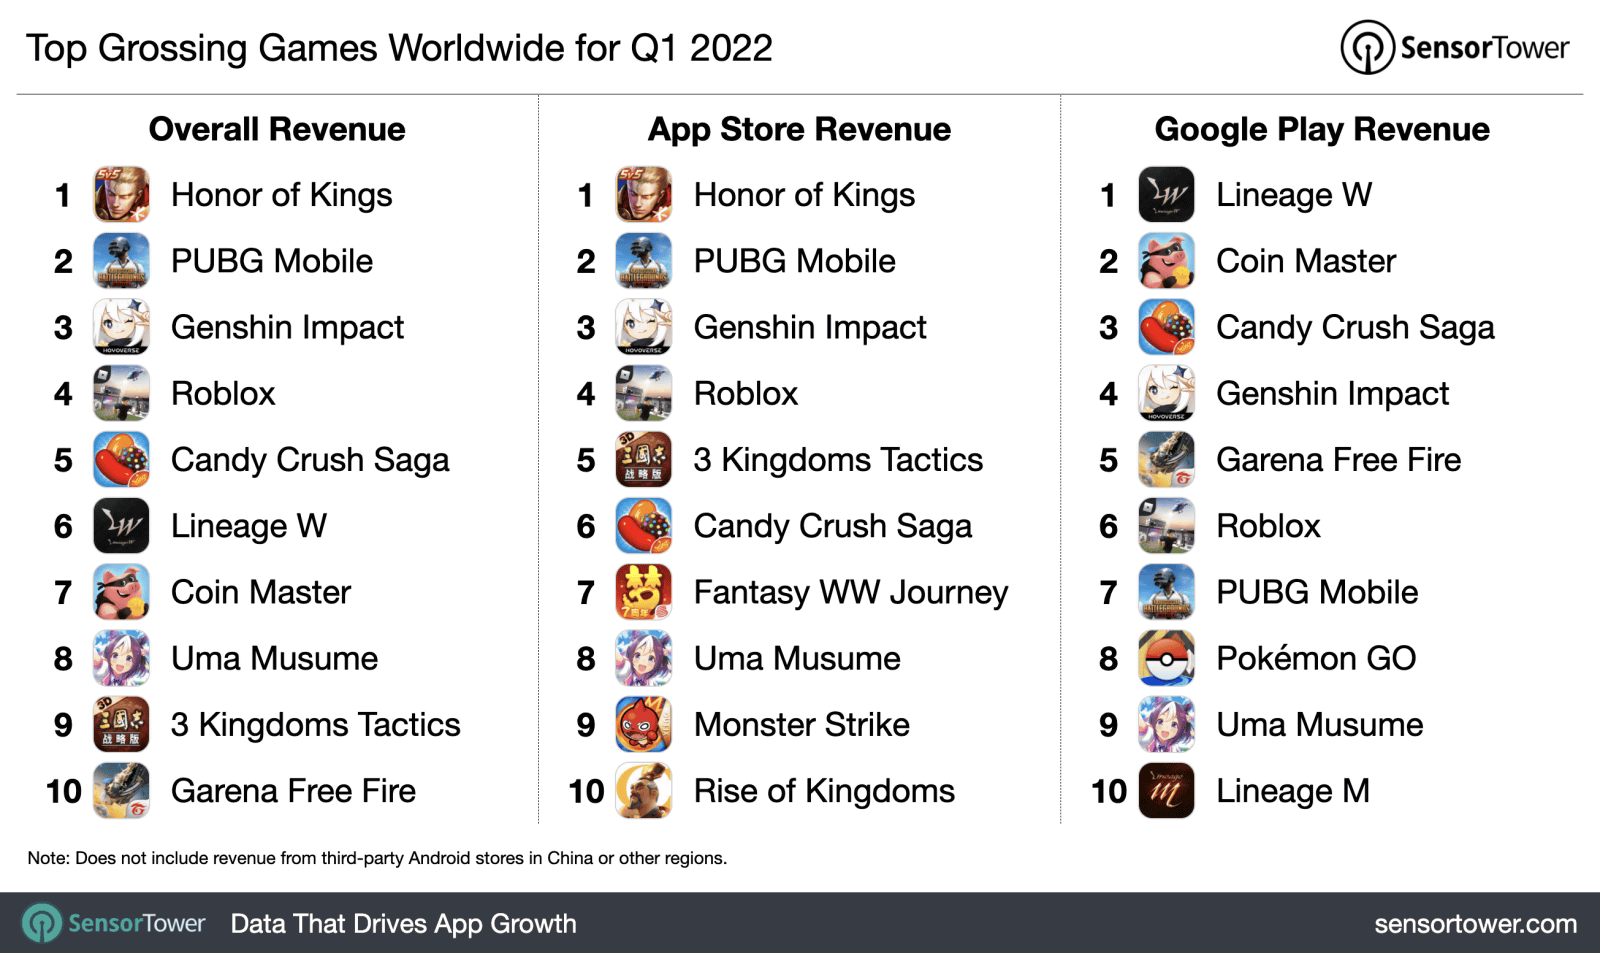 Top Grossing Mobile Games Worldwide for January 2022